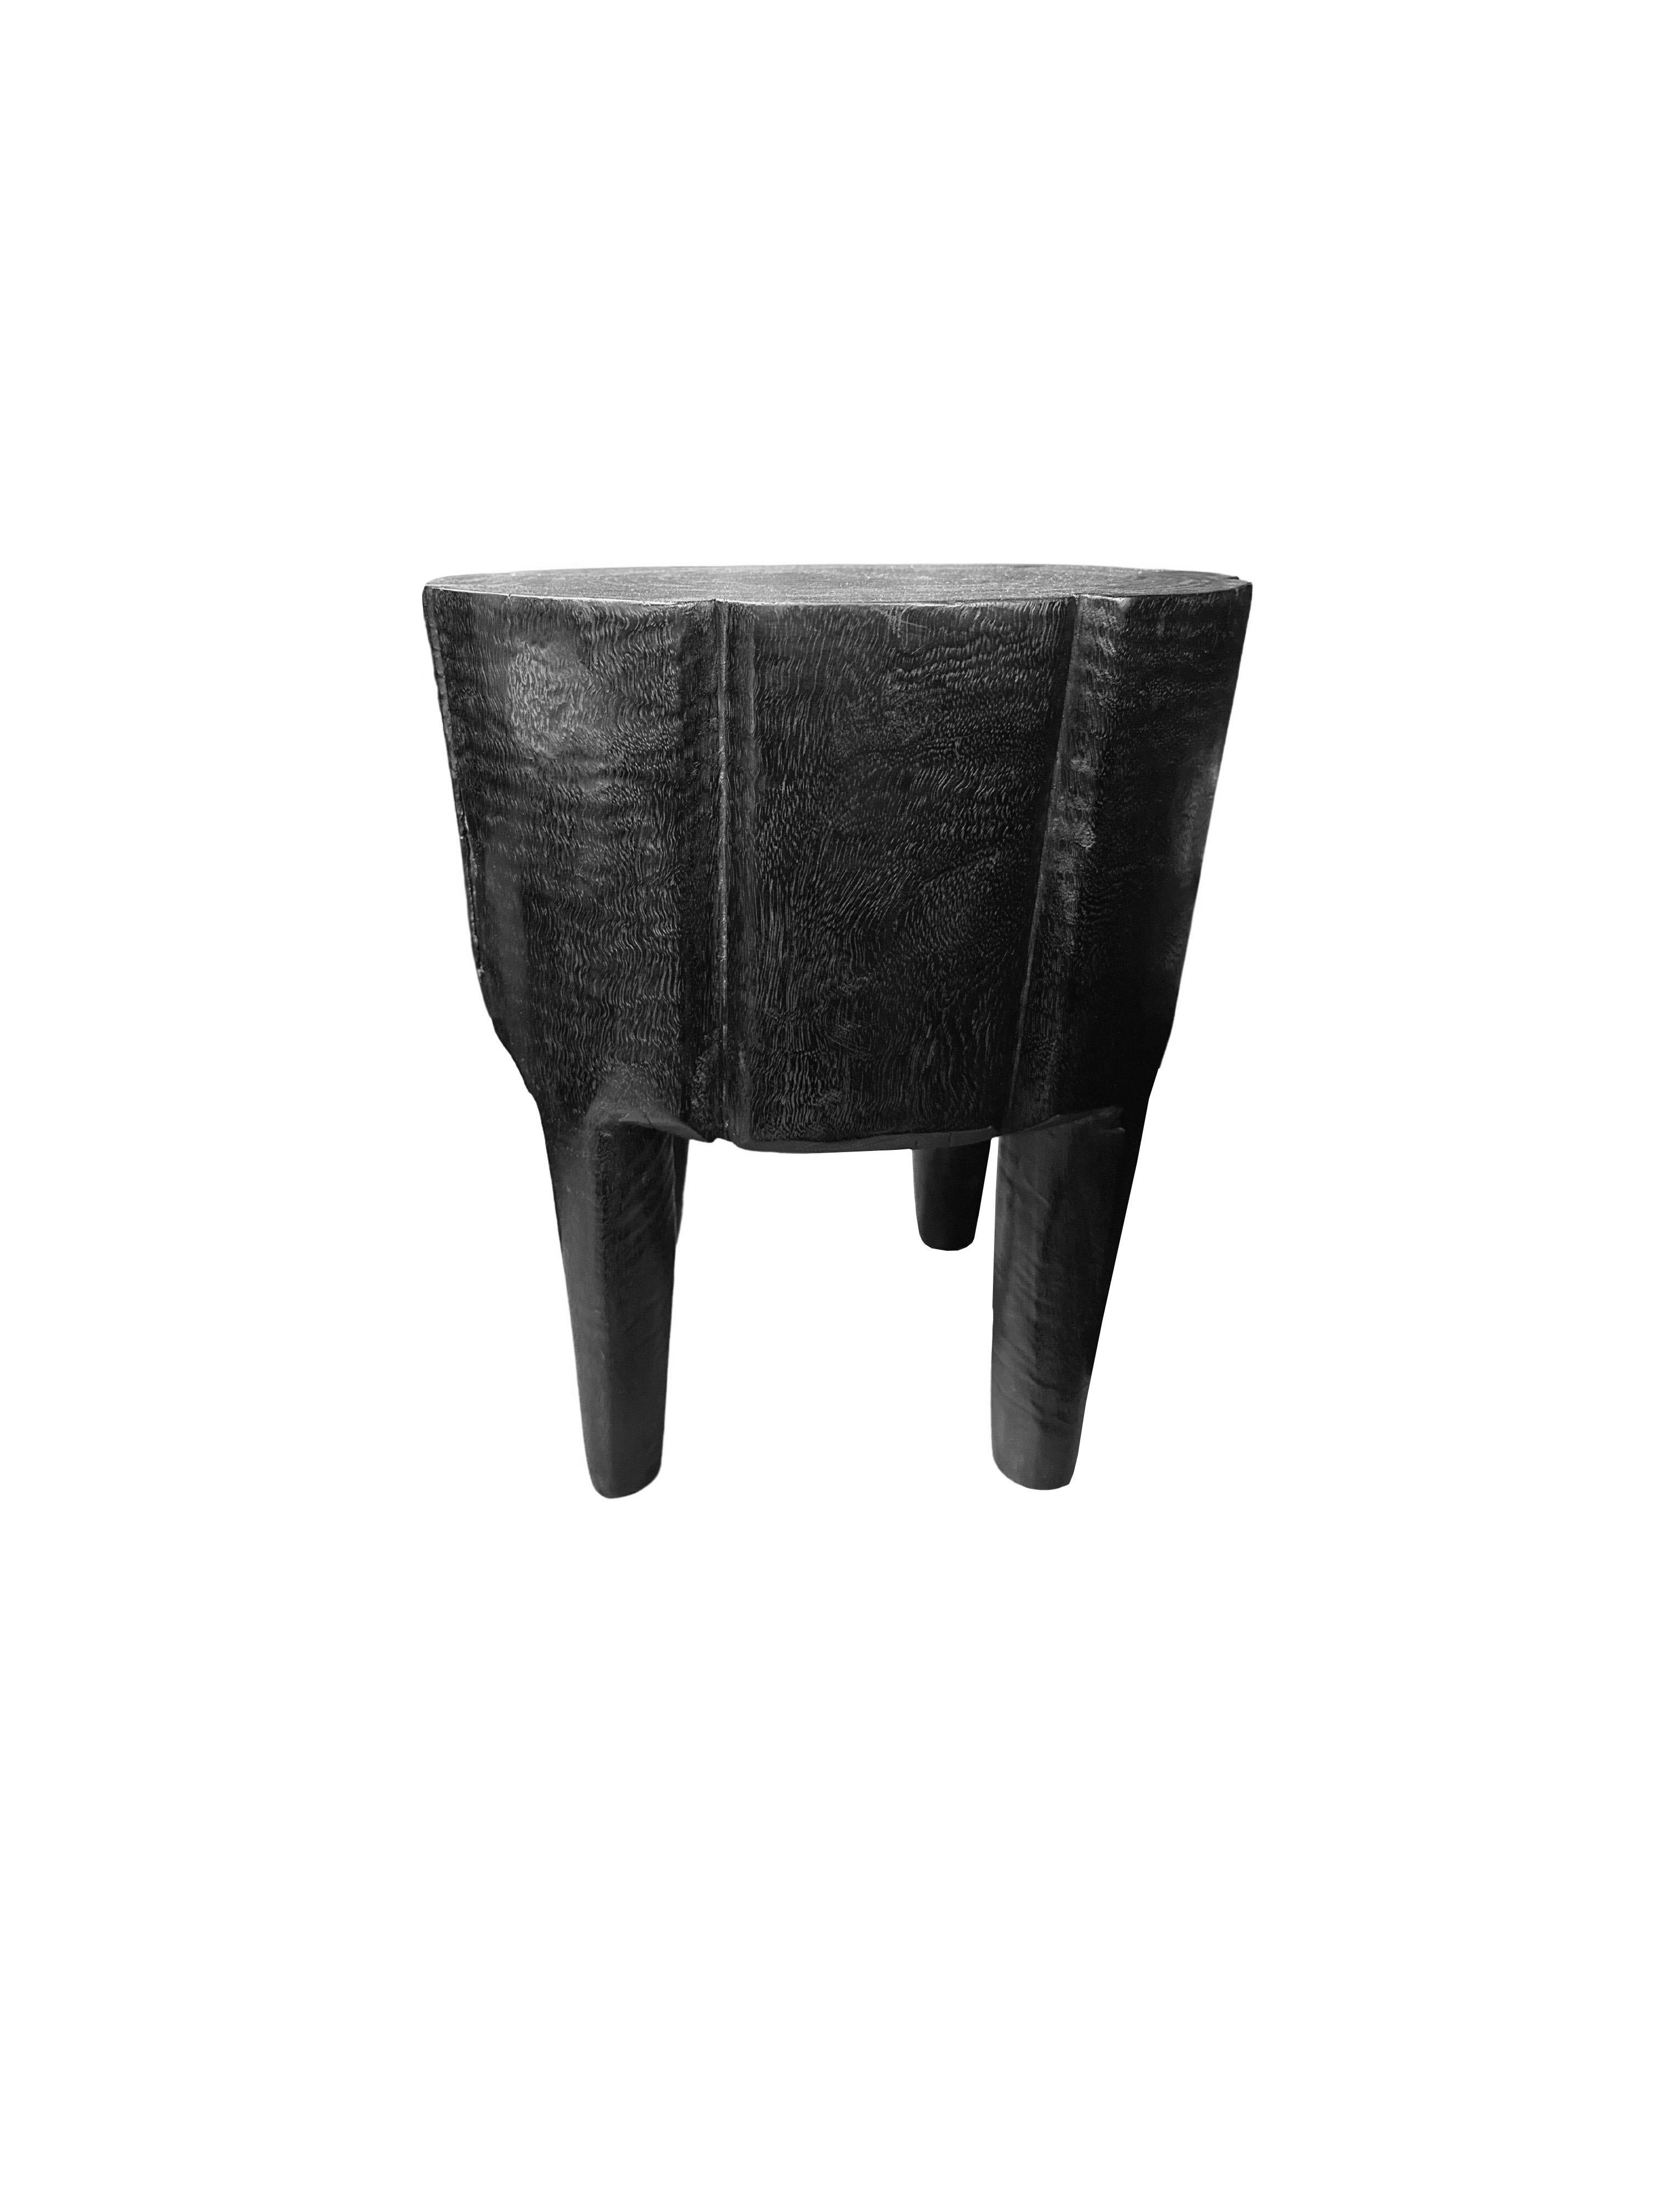 Hand-Crafted Solid Mango Wood Side Table with Burnt Finish, Modern Organic For Sale